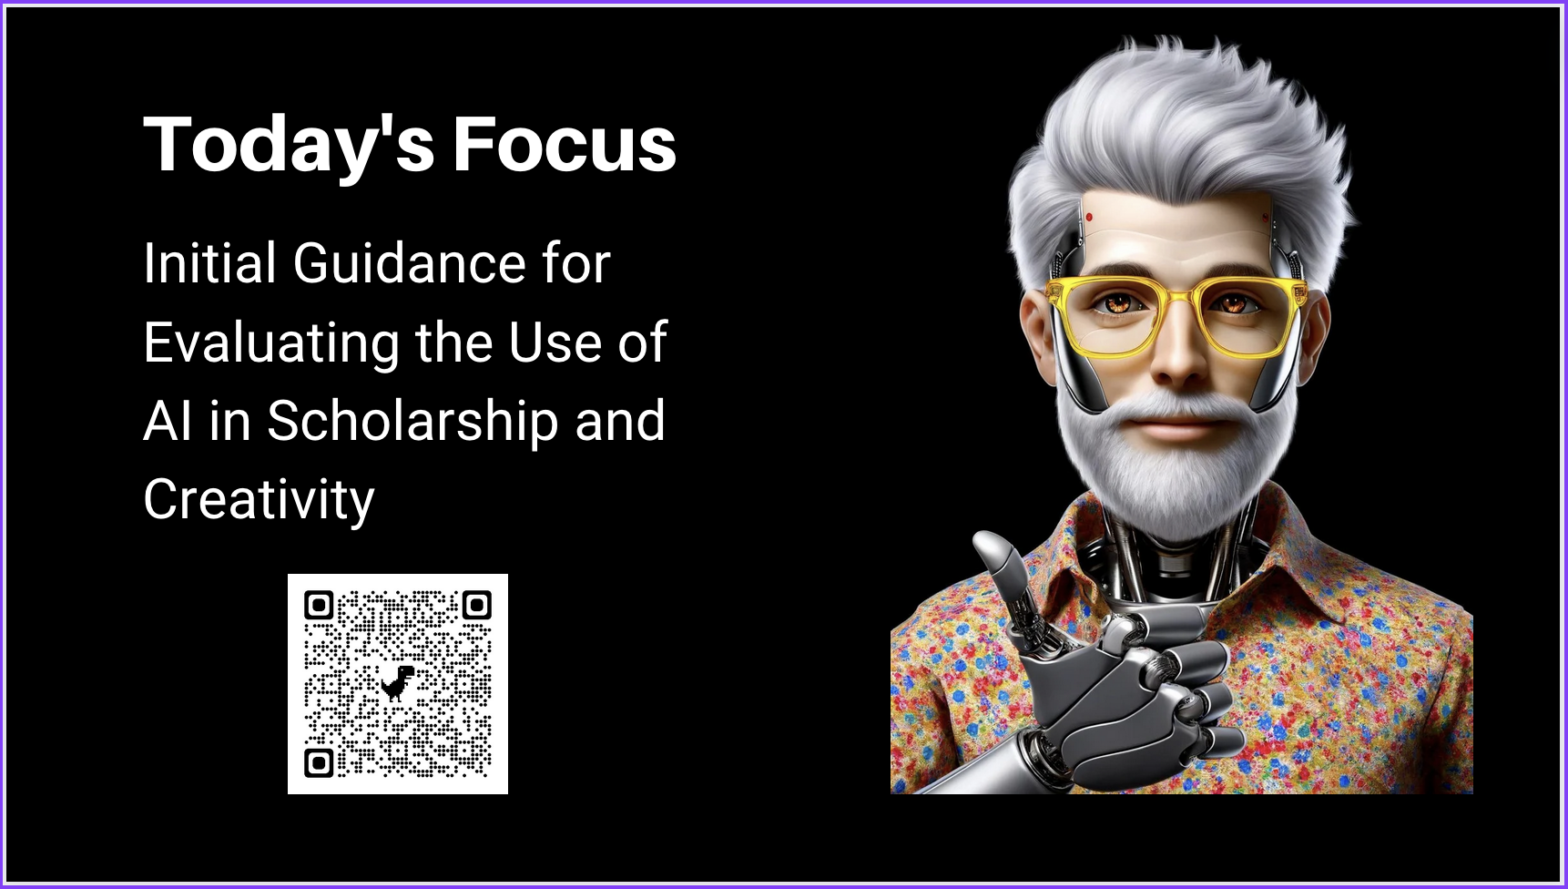 Slide from the talk, depicting an AI generated image based on me and with the following text: "Today's Focus: Initial Guidance for Evaluating the Use of AI in Scholarship and Creativity" and a QR code that links to this link:https://aiandwriting.hcommons.org/2024/01/28/initial-guidance-for-evaluating-the-use-of-ai-in-scholarship-and-creativity/